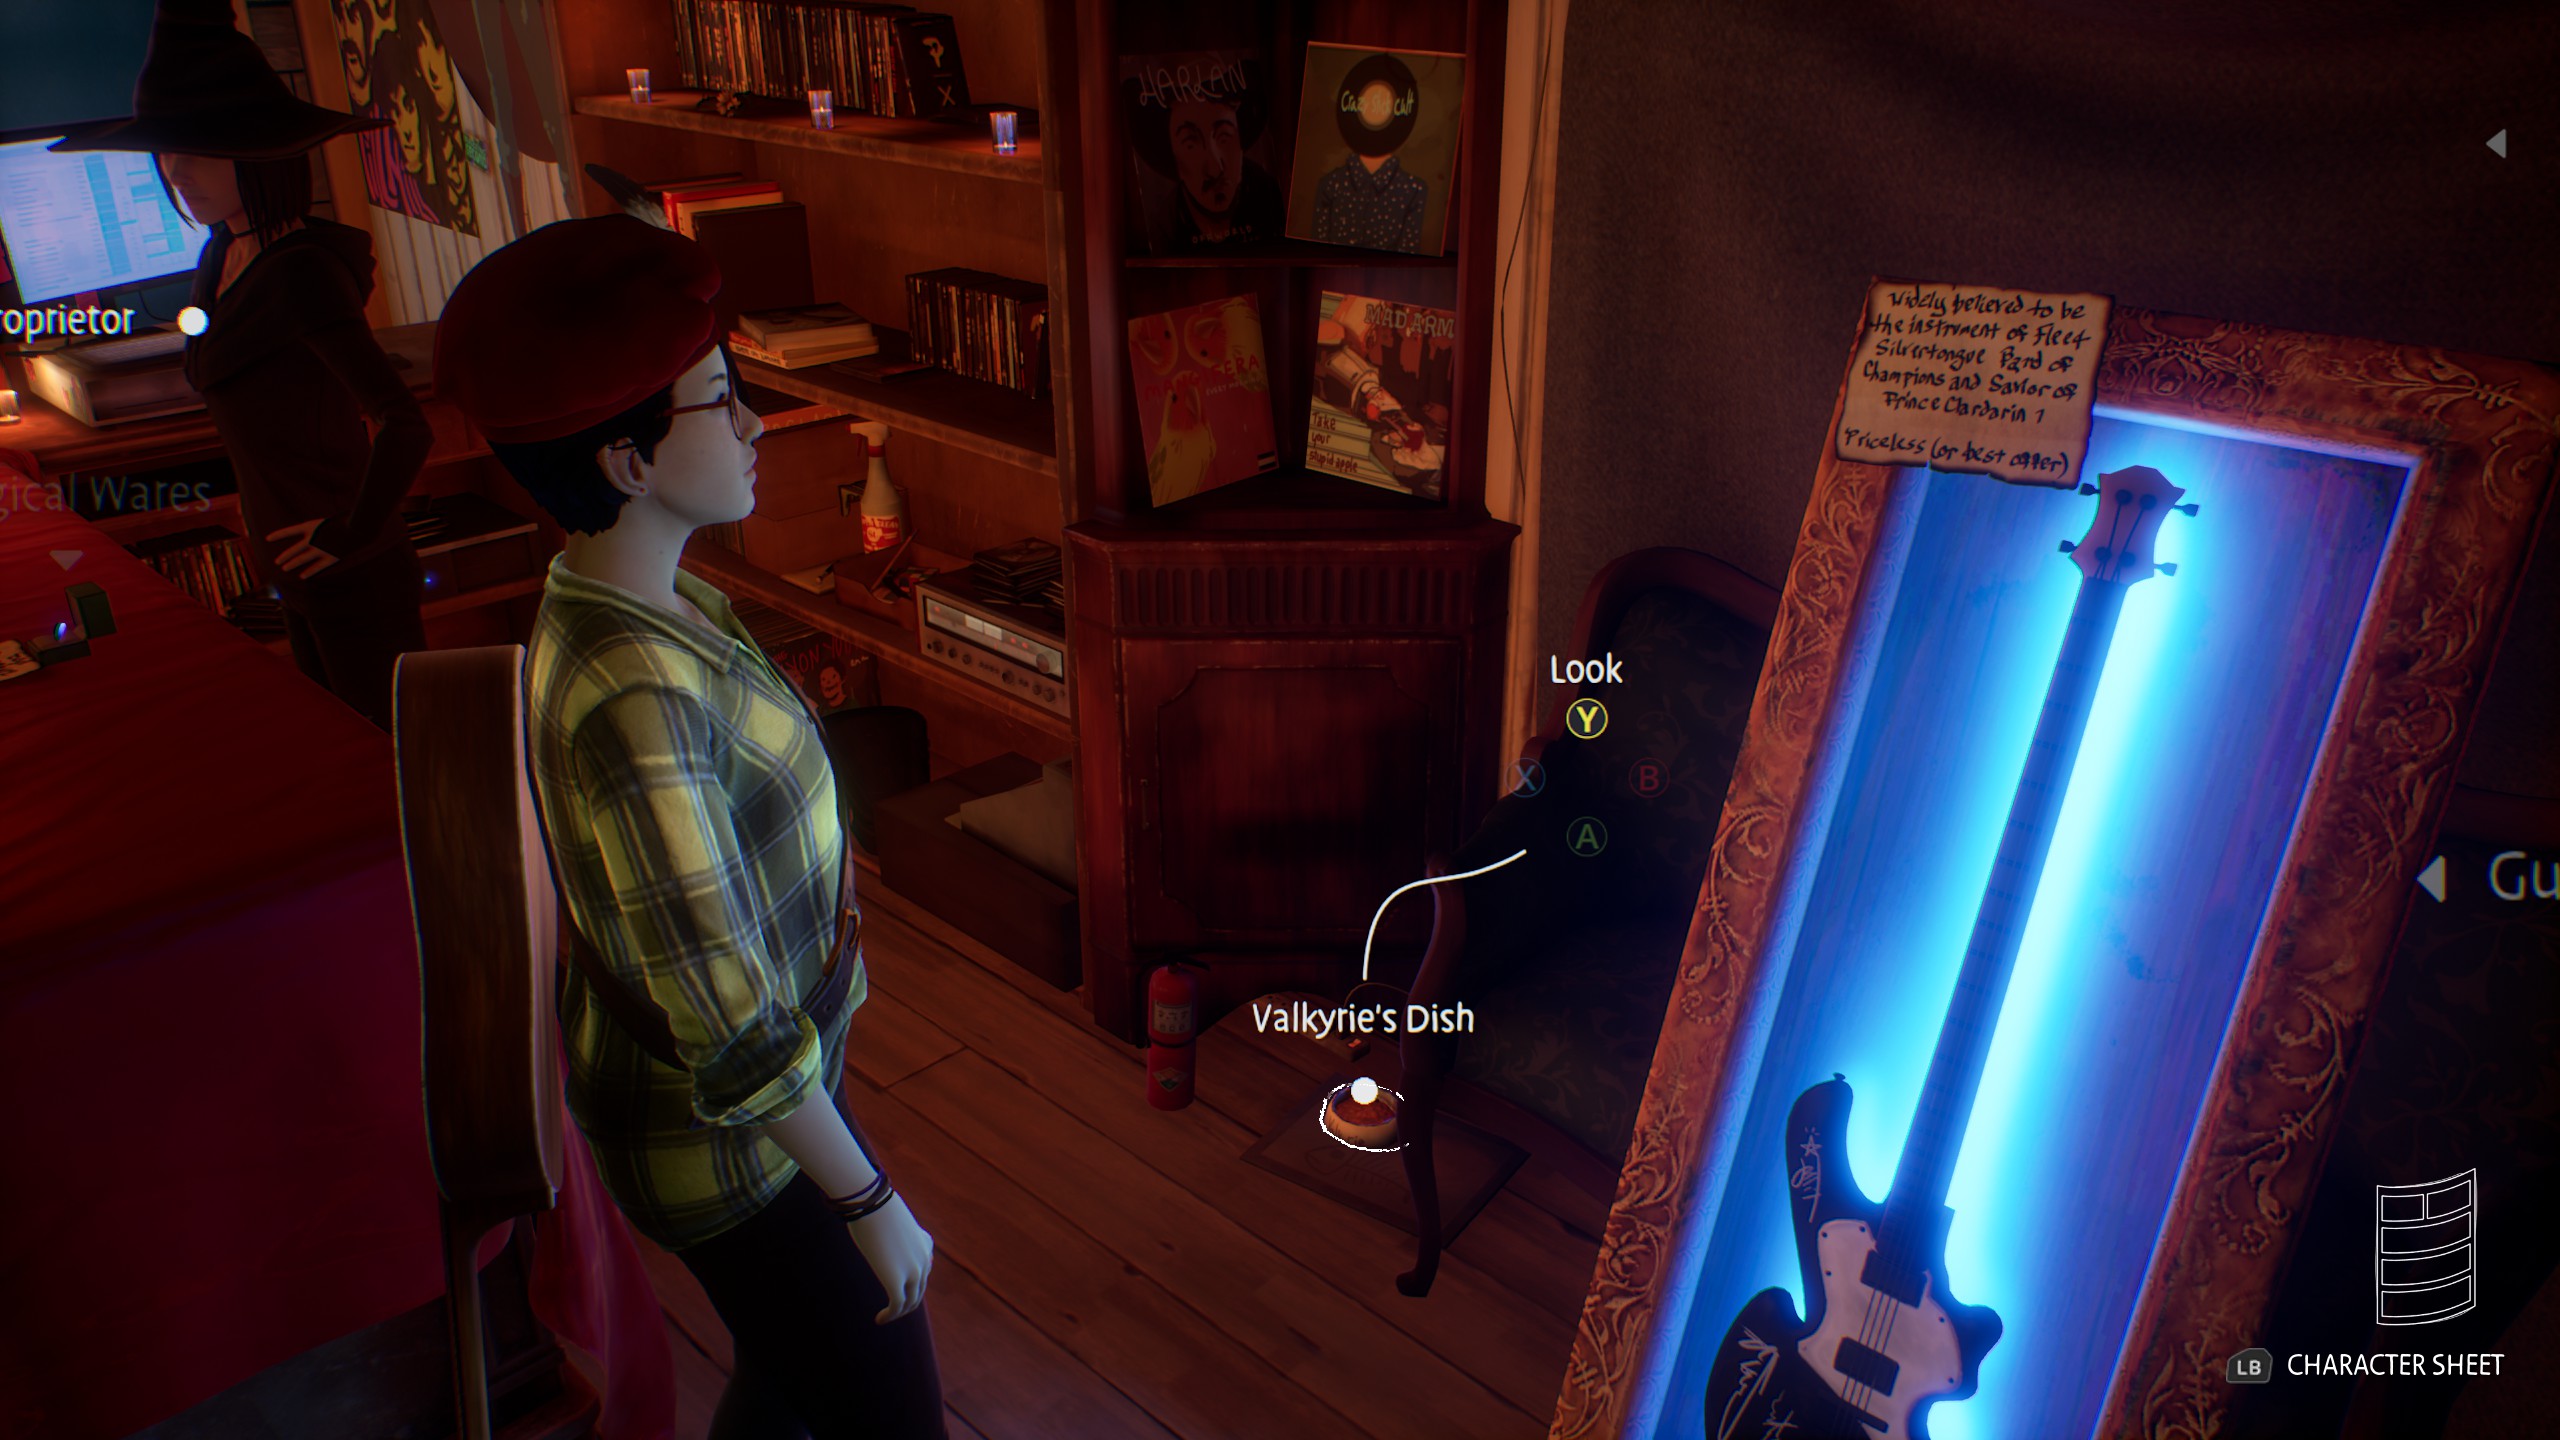 Life Is Strange: True Colors: How to Help the Jelly Bean Counter Win the  Contest